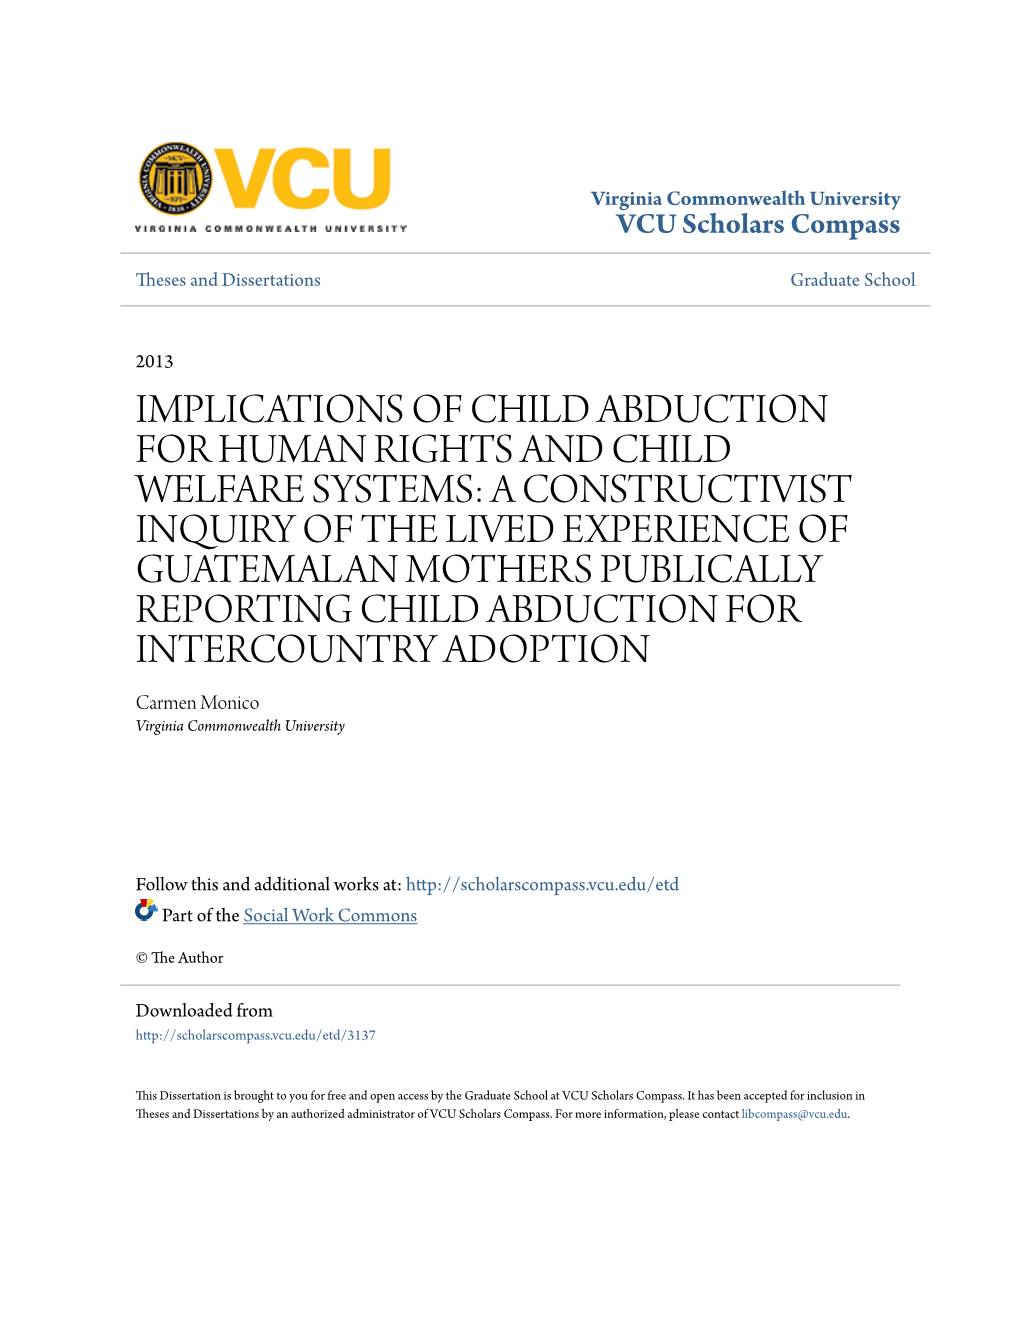 Implications of Child Abduction for Human Rights and Child Welfare Systems